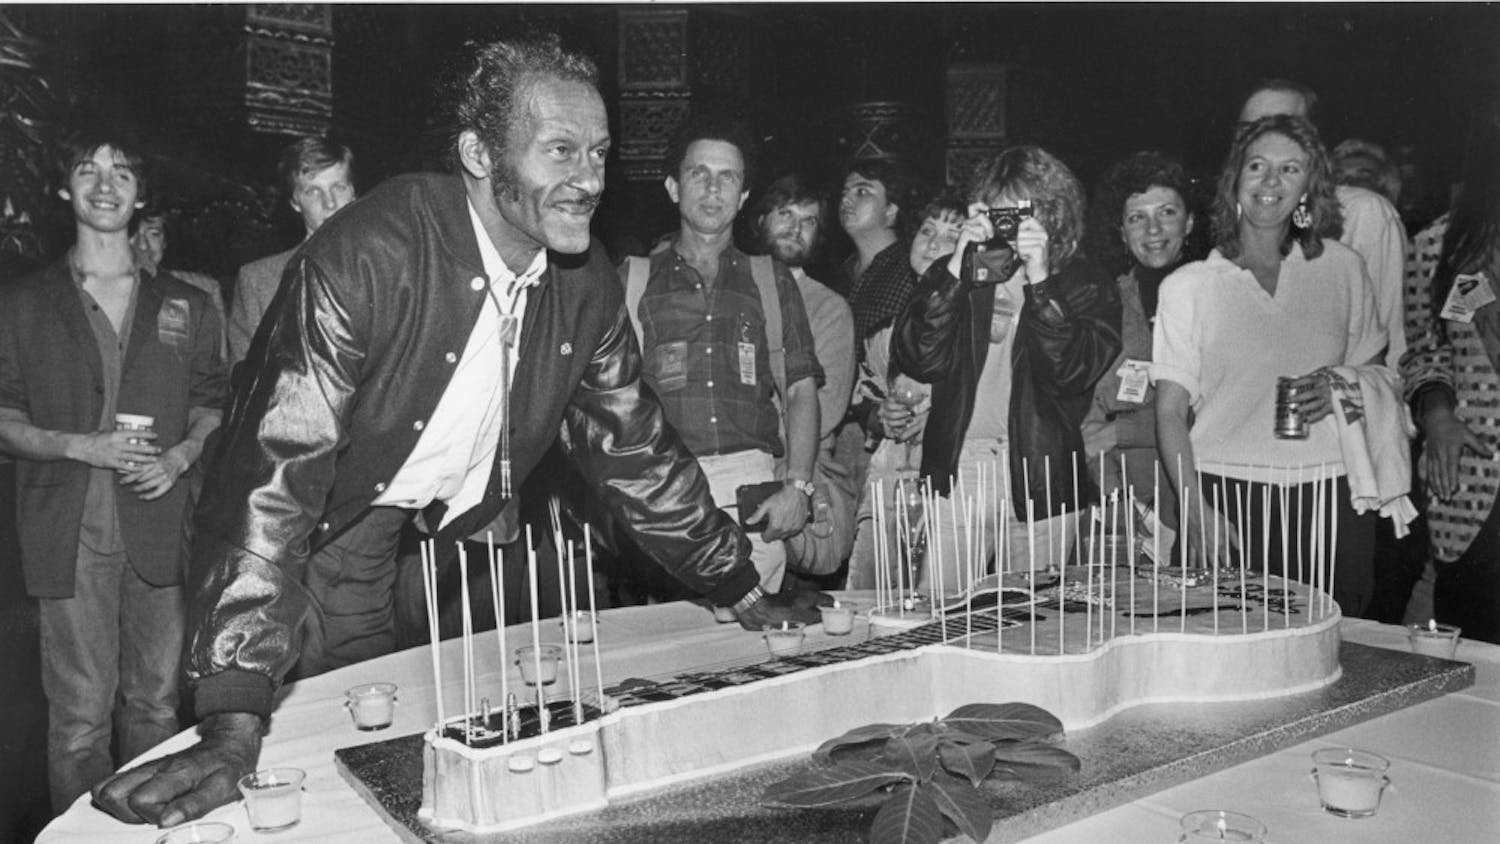 Chuck Berry poses next to a guitar-shaped birthday cake after his performance at the St. Louis Fox Theatre in Missouri on October 17, 1986. Berry died at 90 on Saturday, March 18, 2017. (Al Seib/Los Angeles Times/TNS)